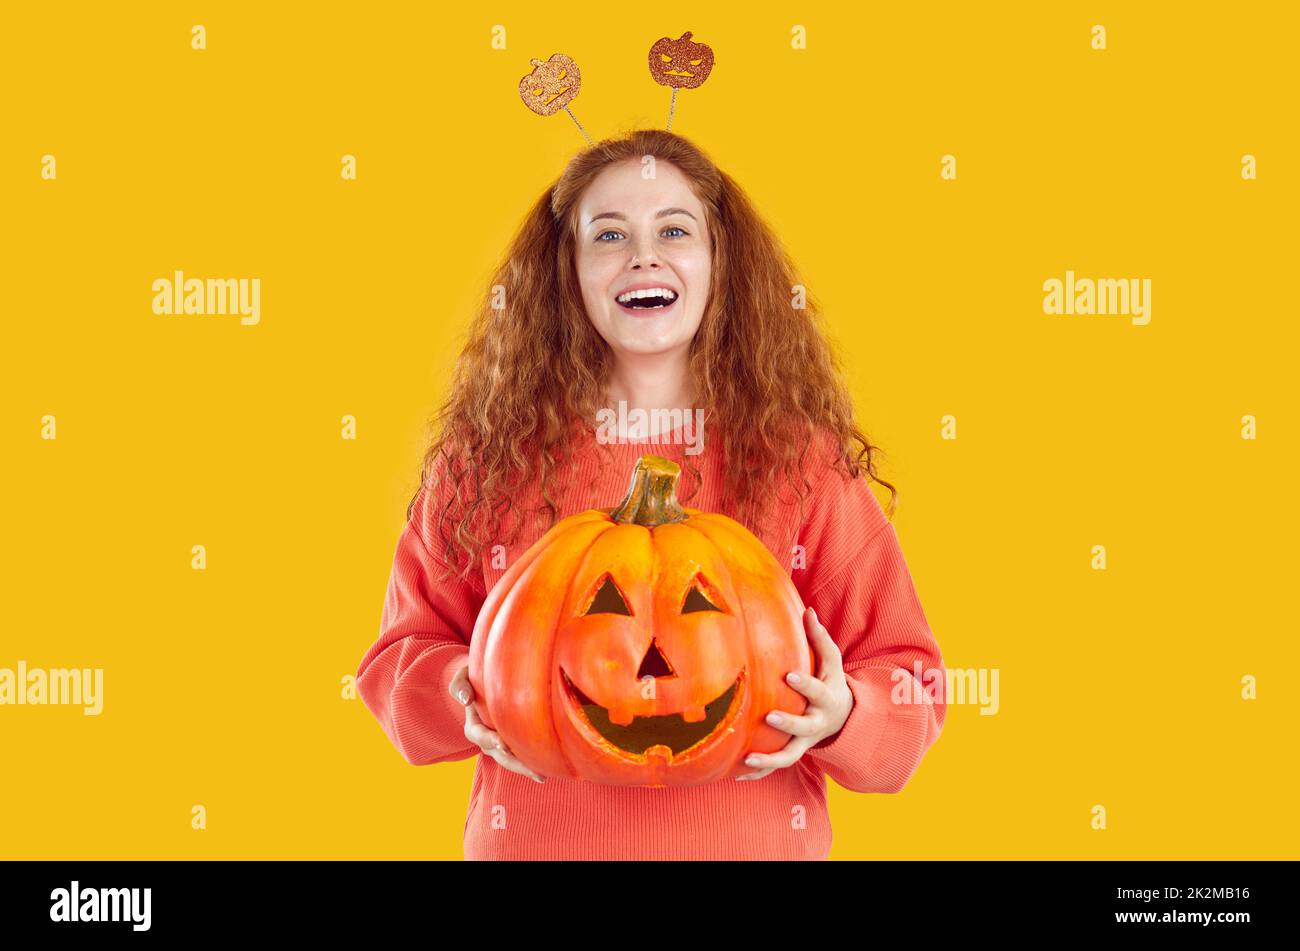 Portrait of cheerful young woman holding Halloween pumpkin with funny carved face on it. Stock Photo